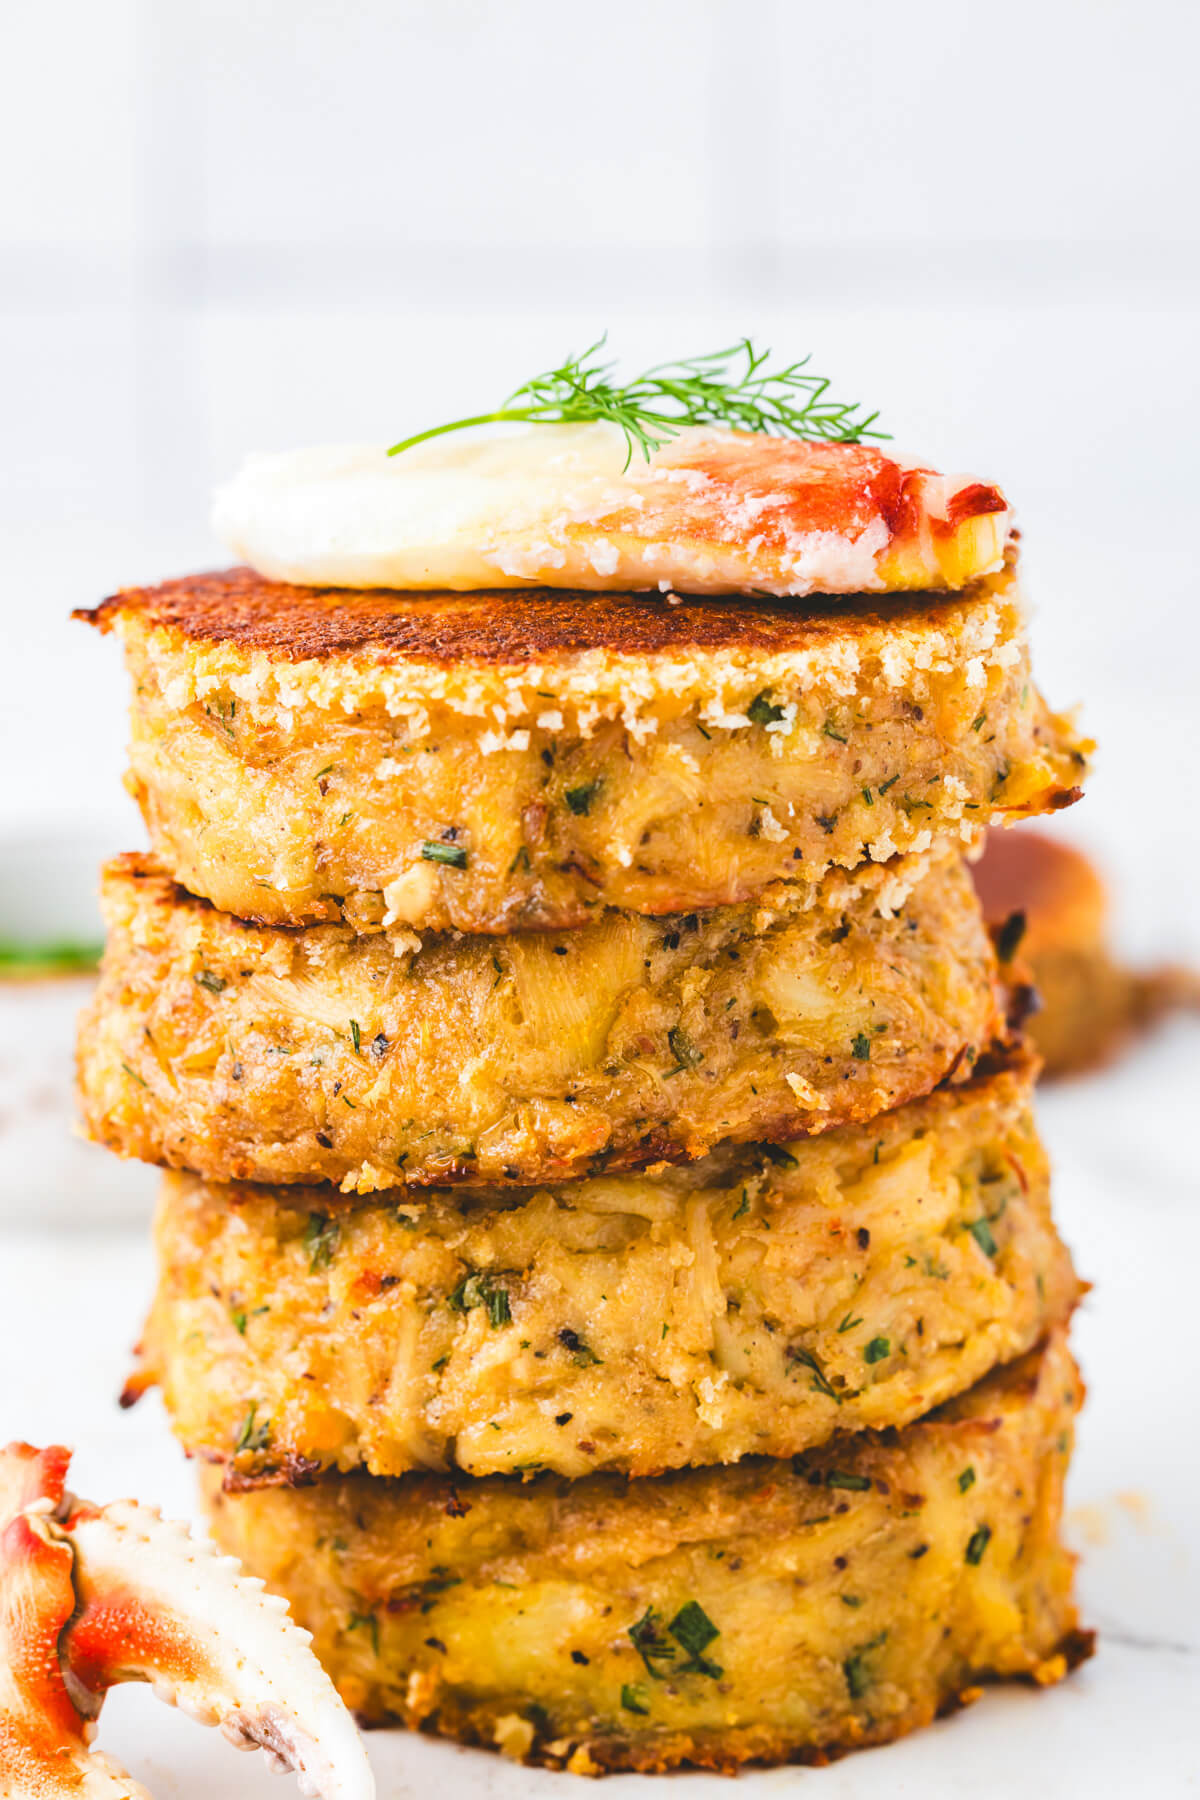 A stack of golden fried crab cakes topped with a dollop of Cajun aioli and fresh dill garnish.